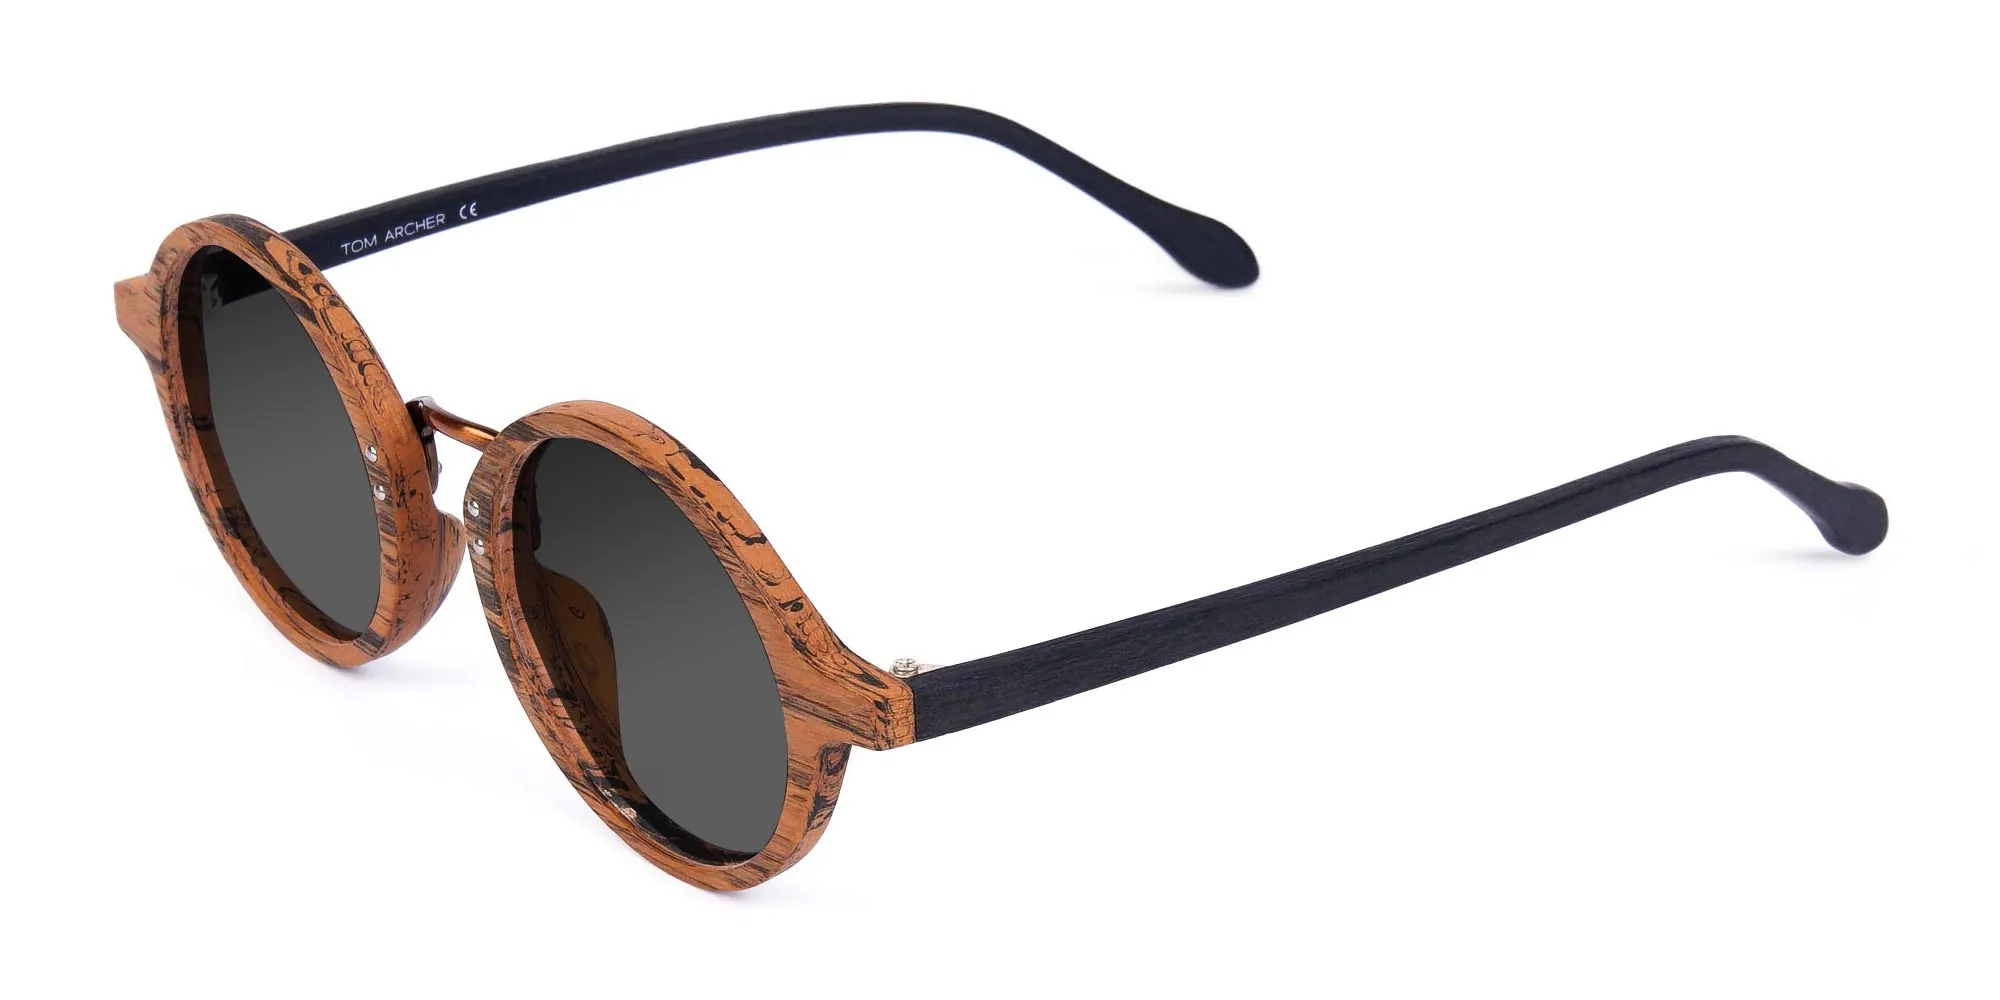 Round-Brown-Wood-Sunglasses-With-Grey-Tint-2